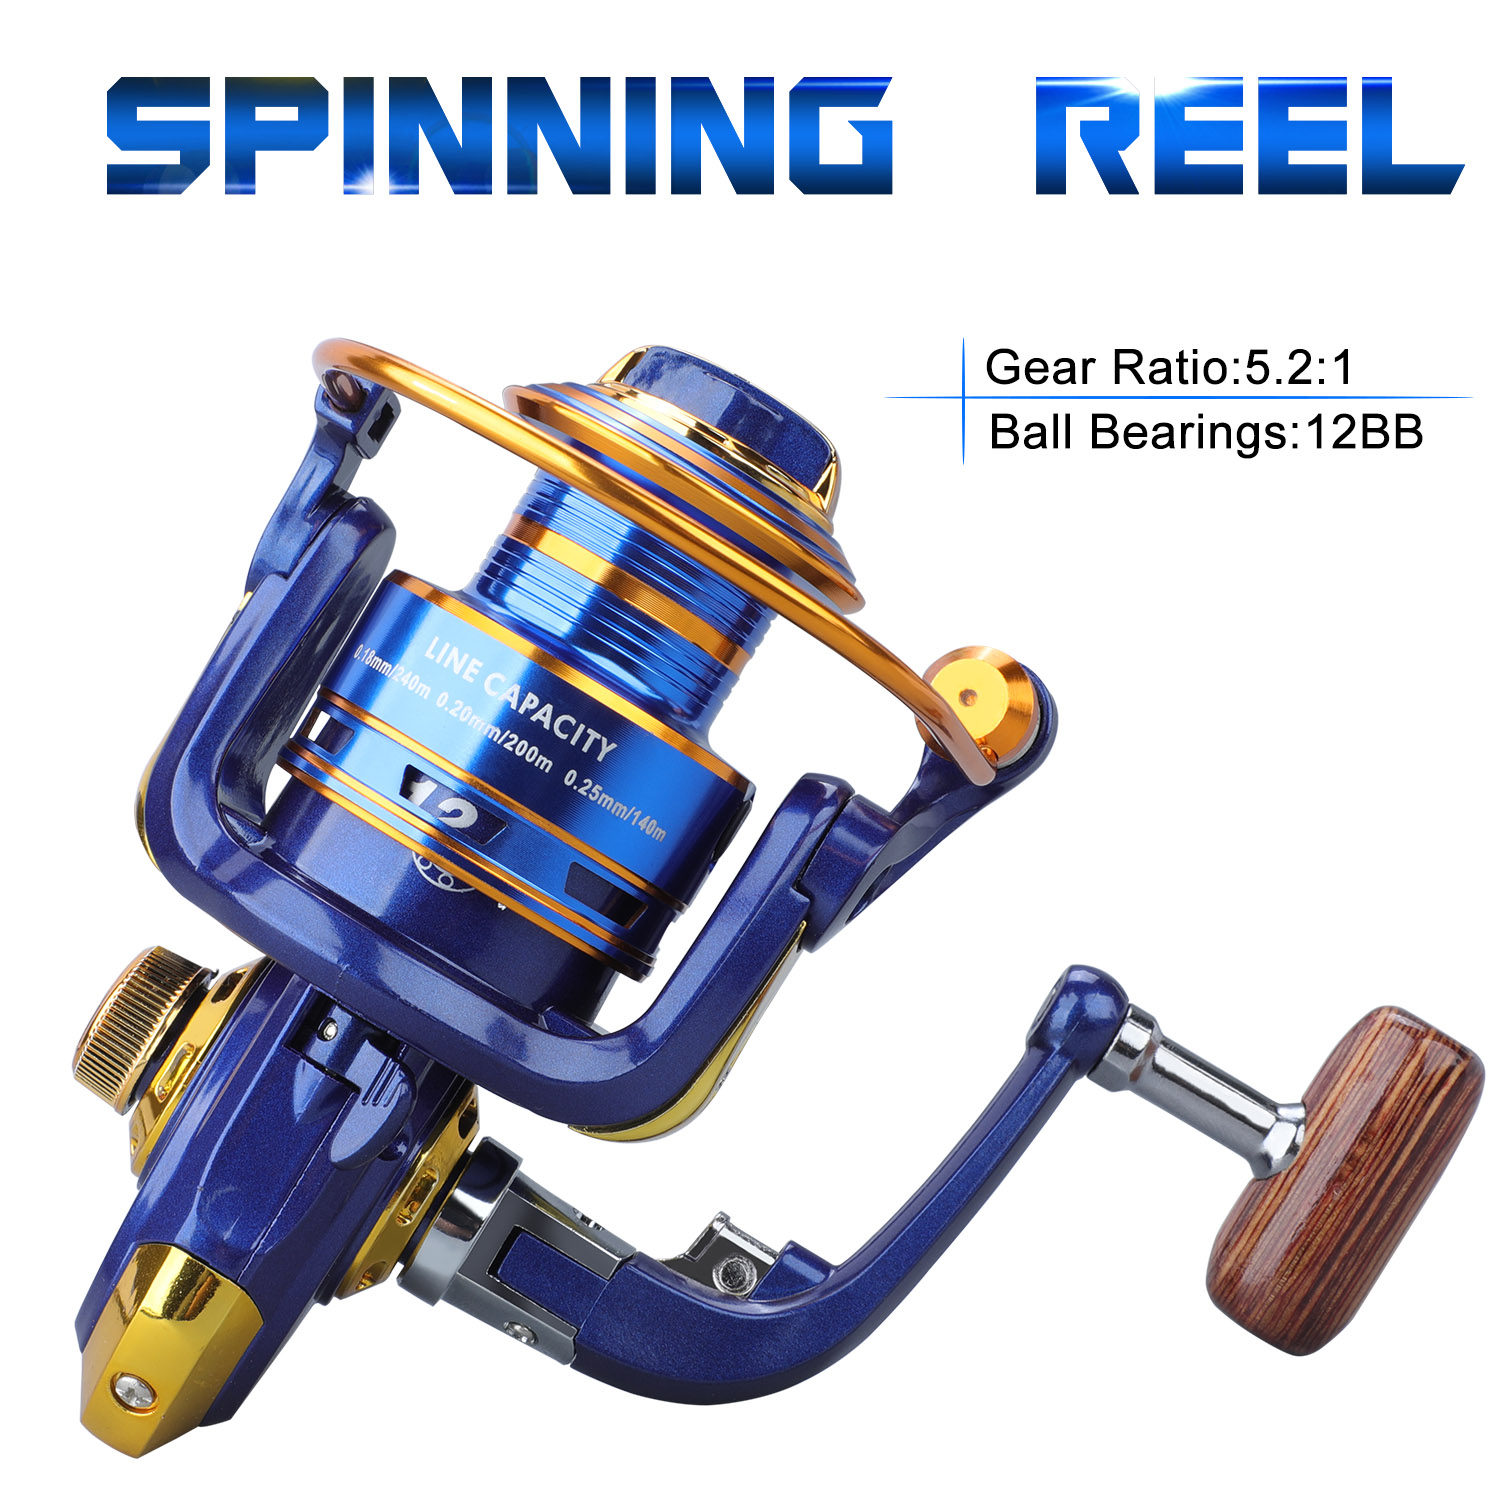 Yumoshi 12 Ball Bearing Baitcaster Spinning Reel For Carp, Saltwater, And Surf  Fishing All Metal Construction, 1000 9000 Size, LJ Model Casting From  Wenshulan, $67.17